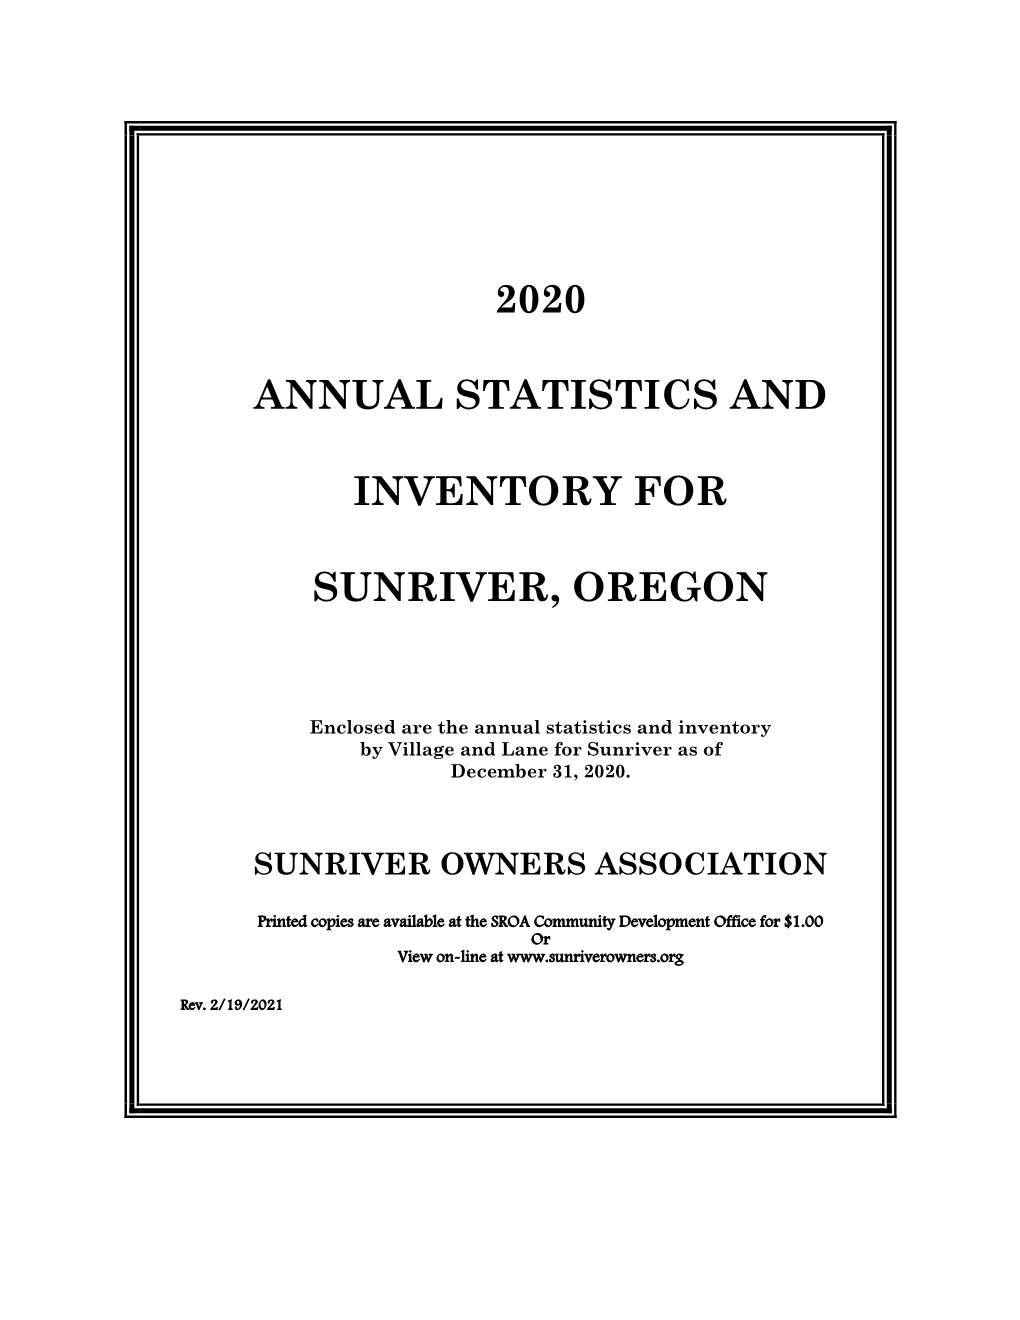 2020 Annual Statistics and Inventory for Sunriver